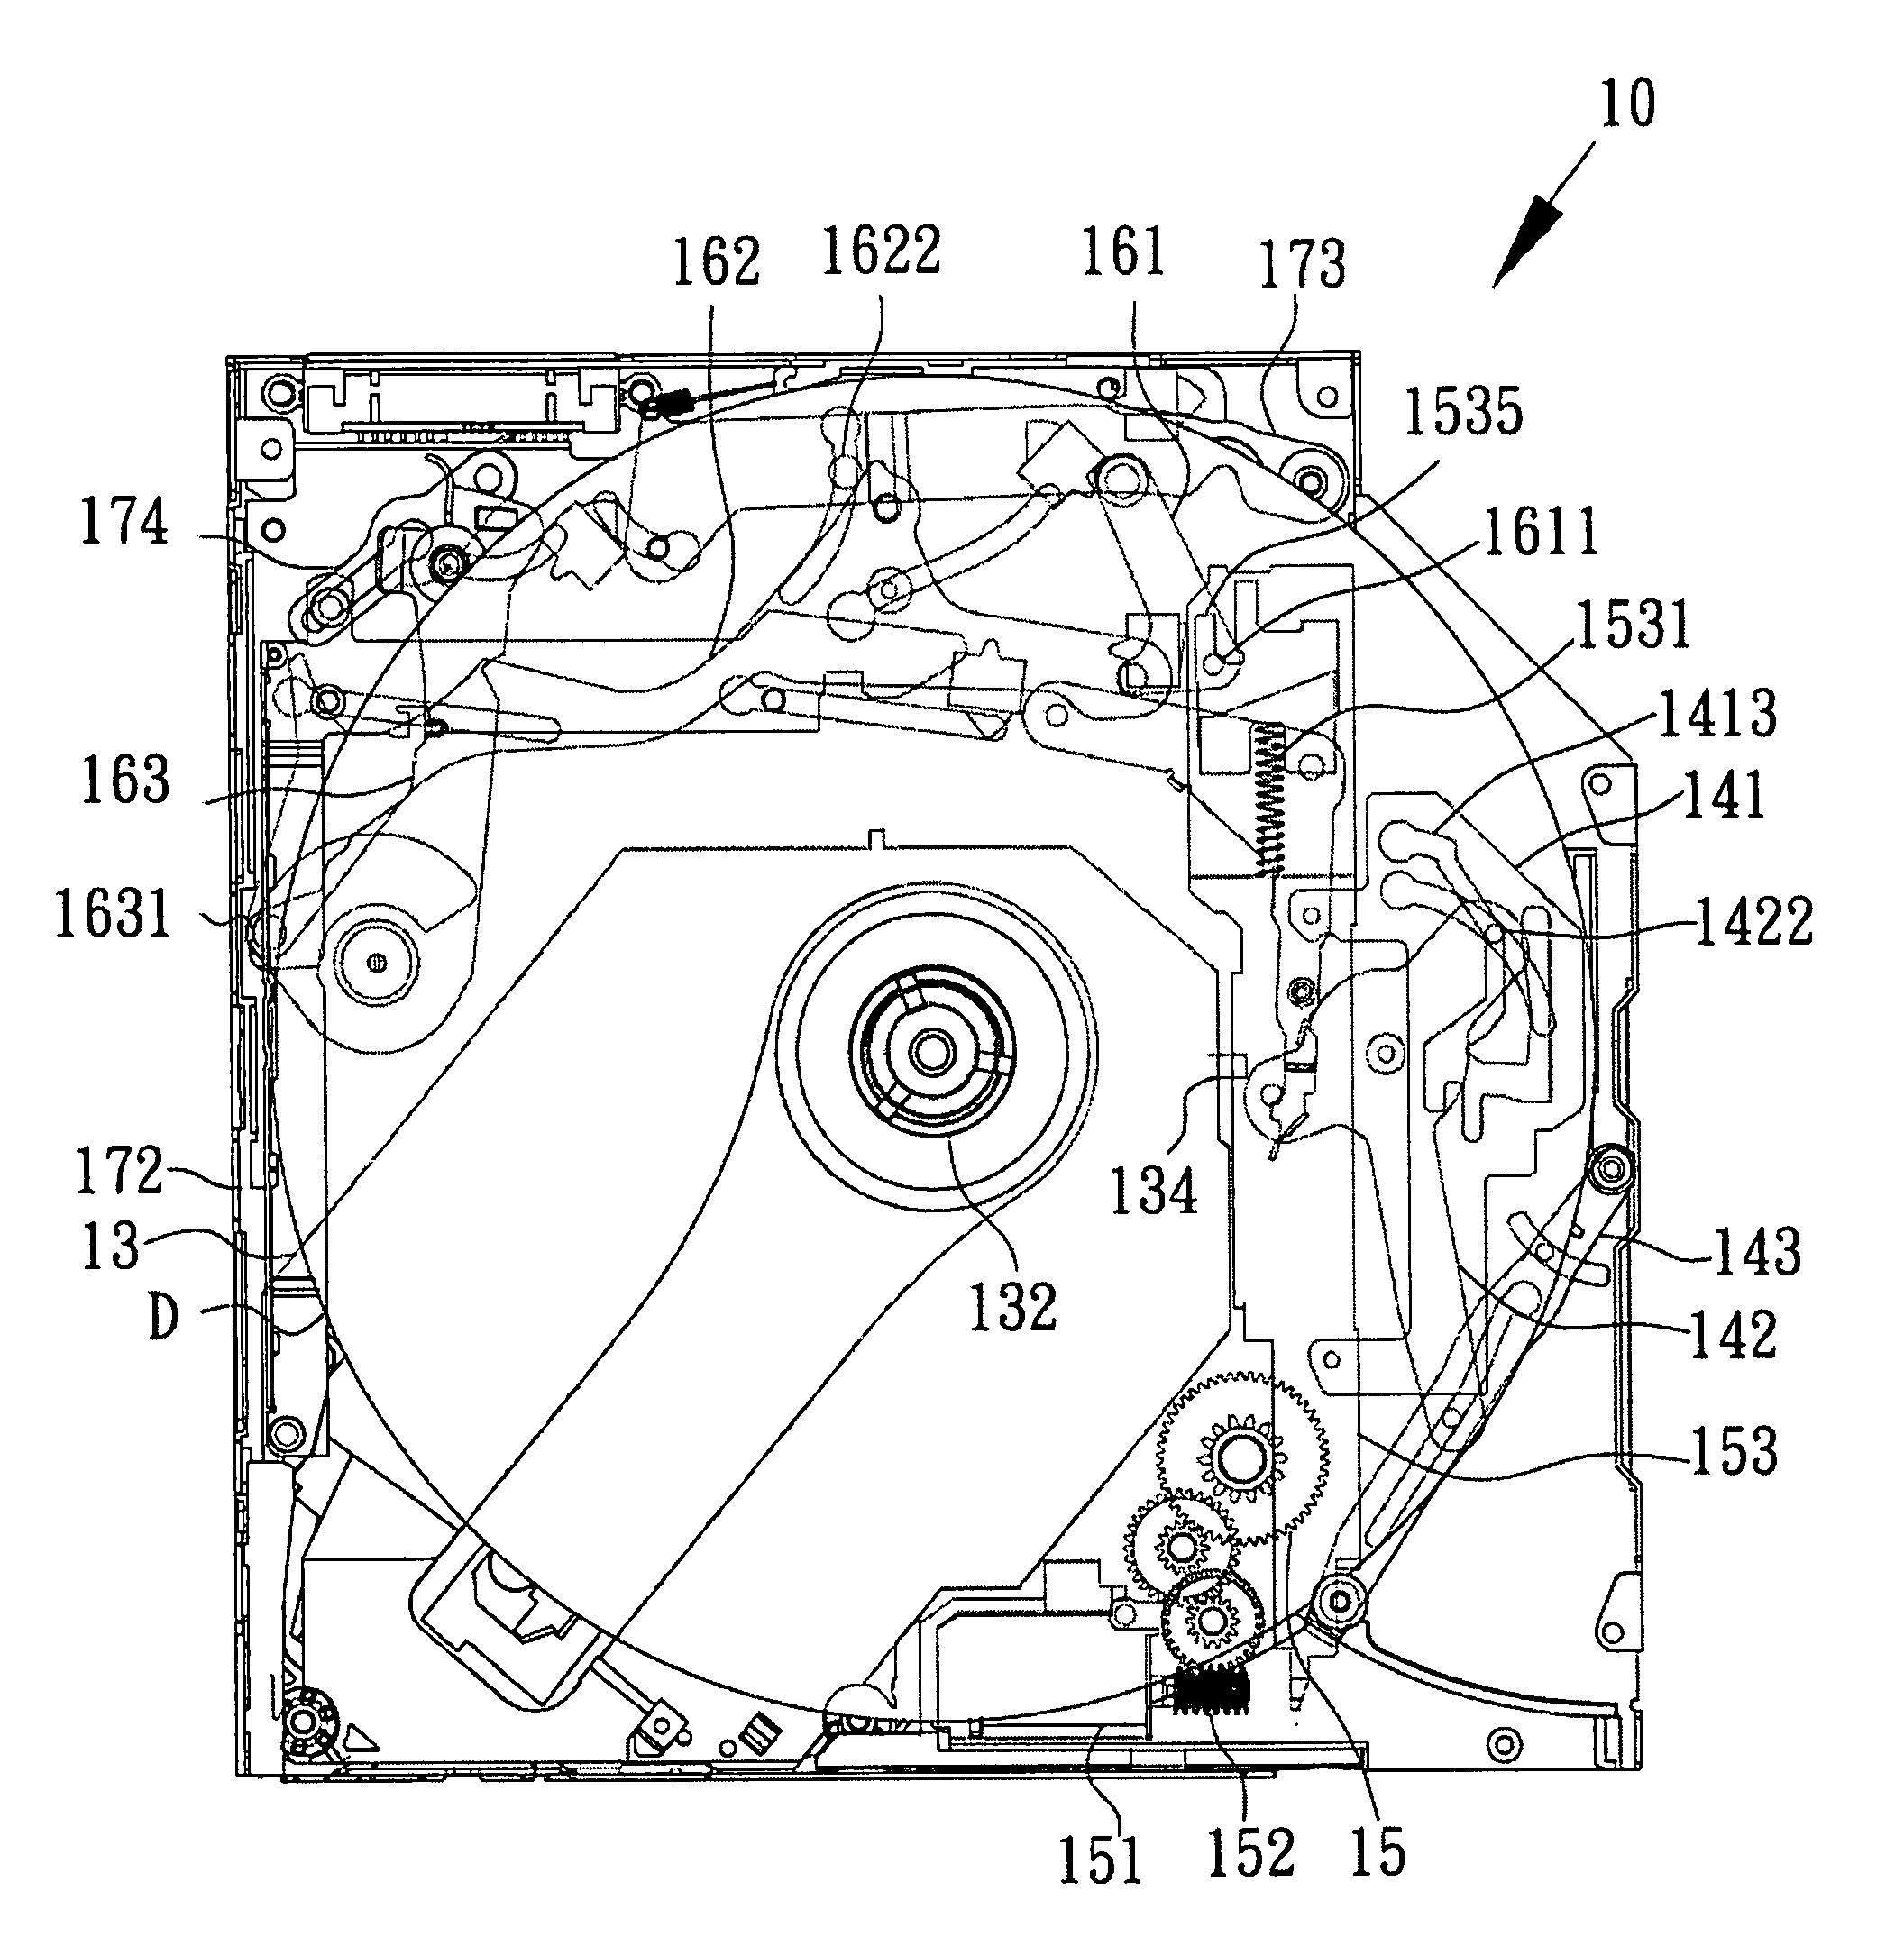 Slot-in disk drive device and method